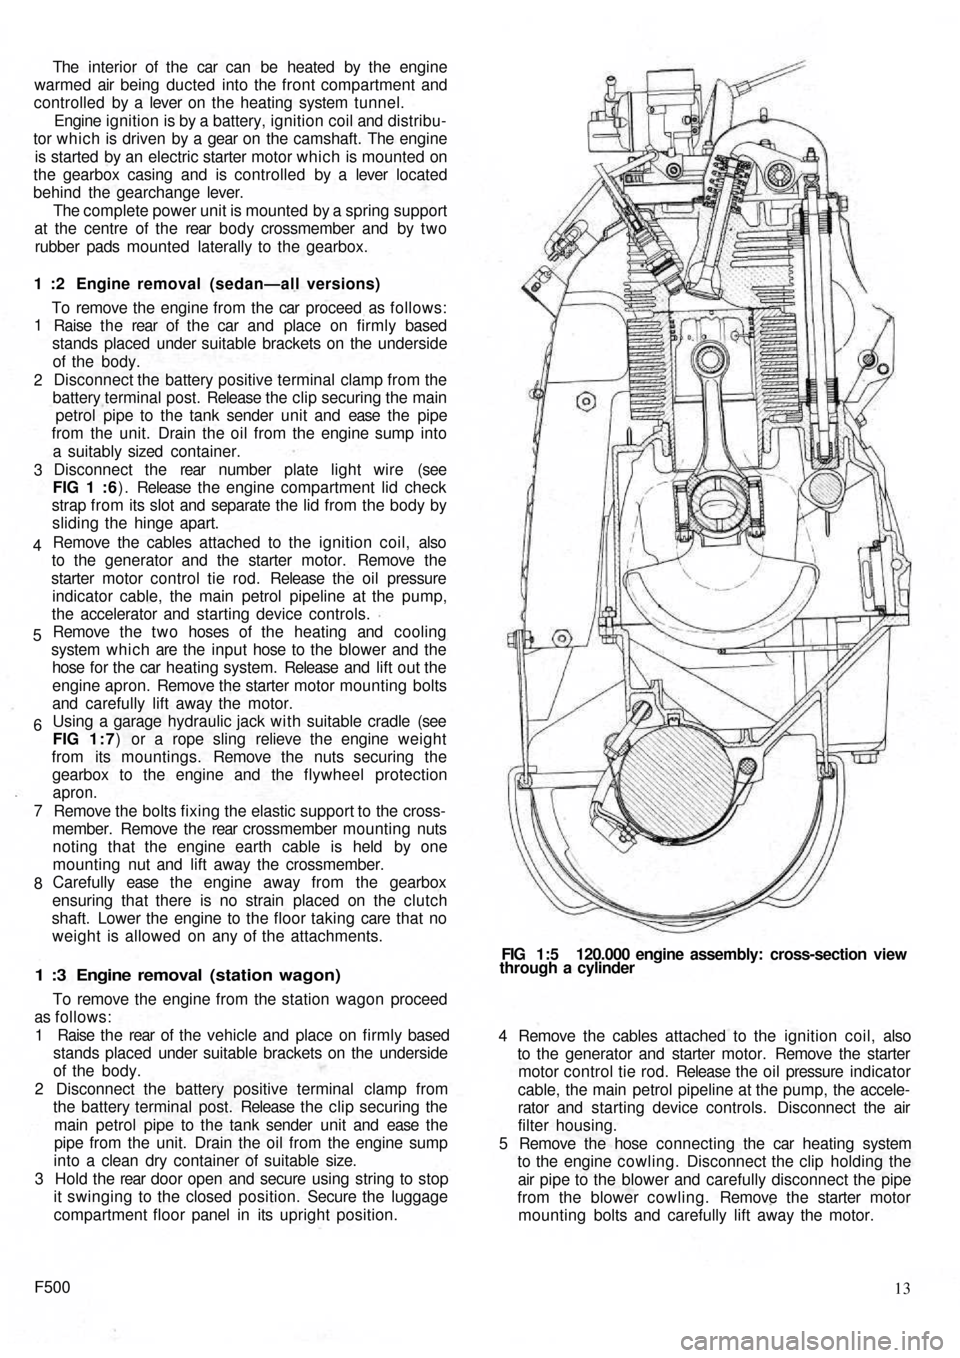 FIAT 500 1960 1.G Workshop Manual The  interior of the  car can  be heated by the engine
warmed air being ducted into the front compartment and
controlled  by a  lever on the heating system tunnel.
Engine ignition is by a battery, ign